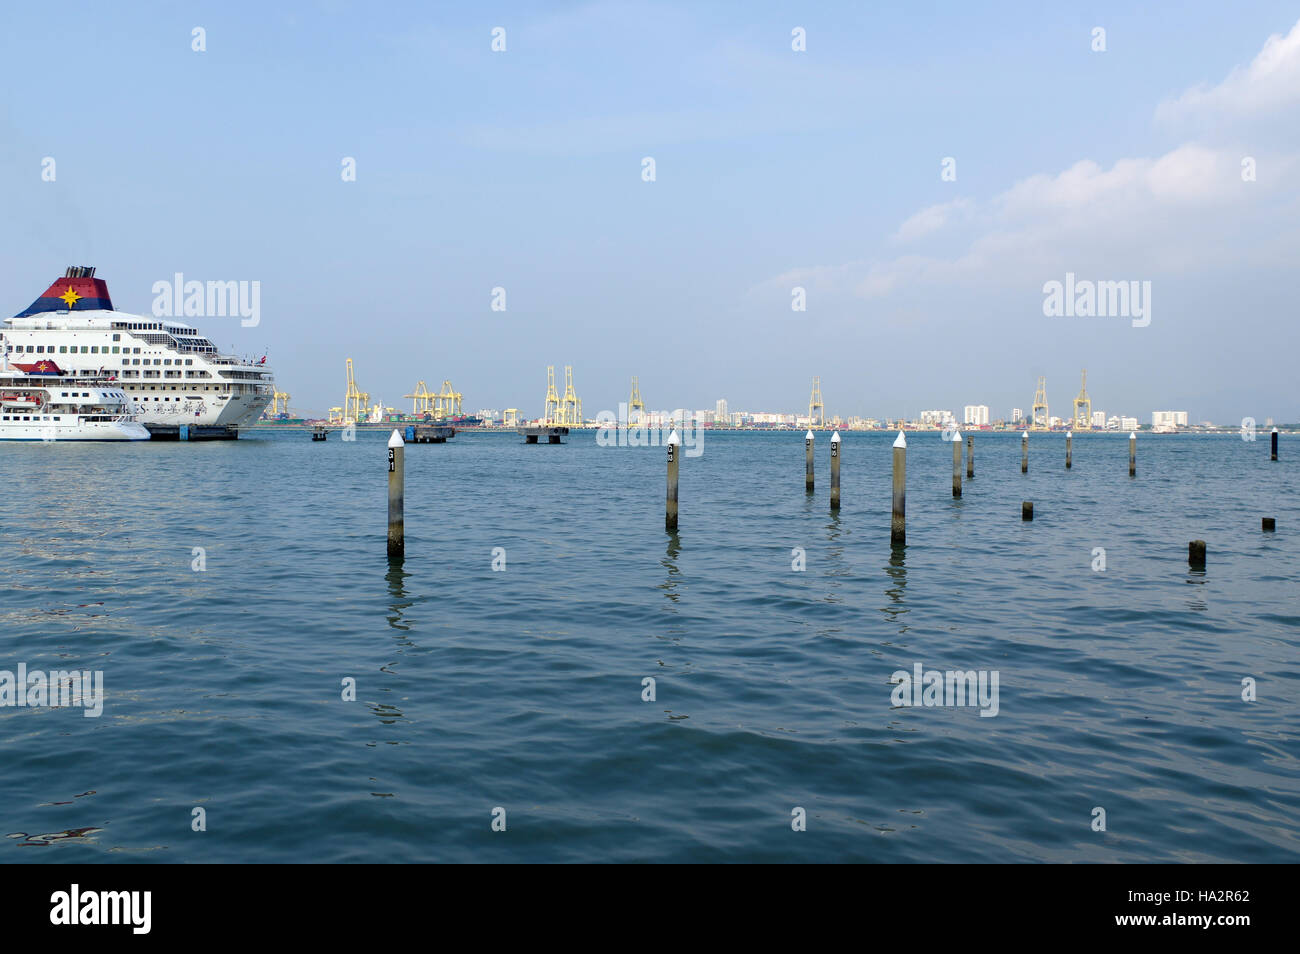 GEORGETOWN, PENANG, MALAYSIA - APRIL 18, 2016. A cruise ship from the superstar line alongside pier in Georgetown Penang. Stock Photo